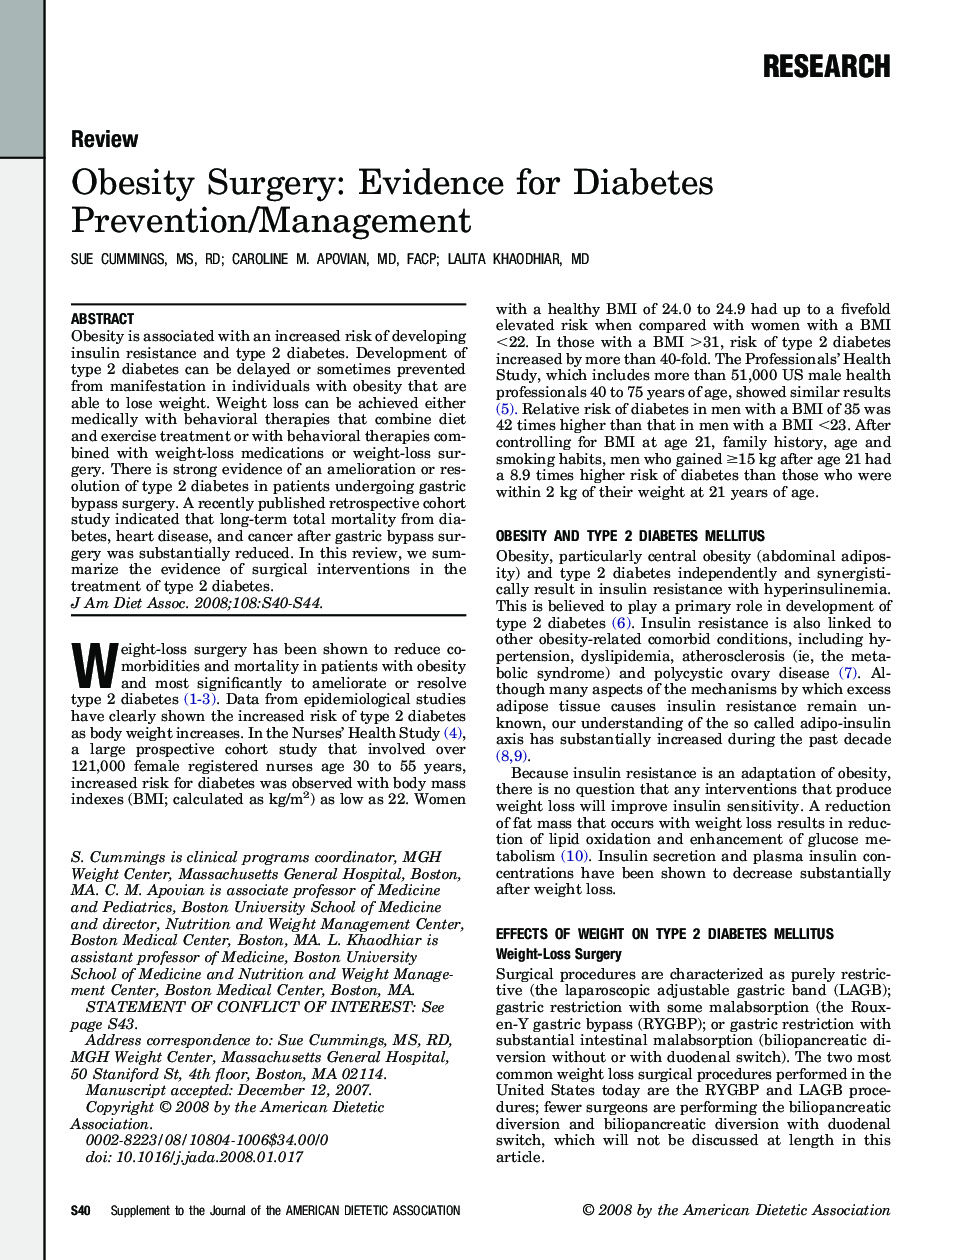 Obesity Surgery: Evidence for Diabetes Prevention/Management 